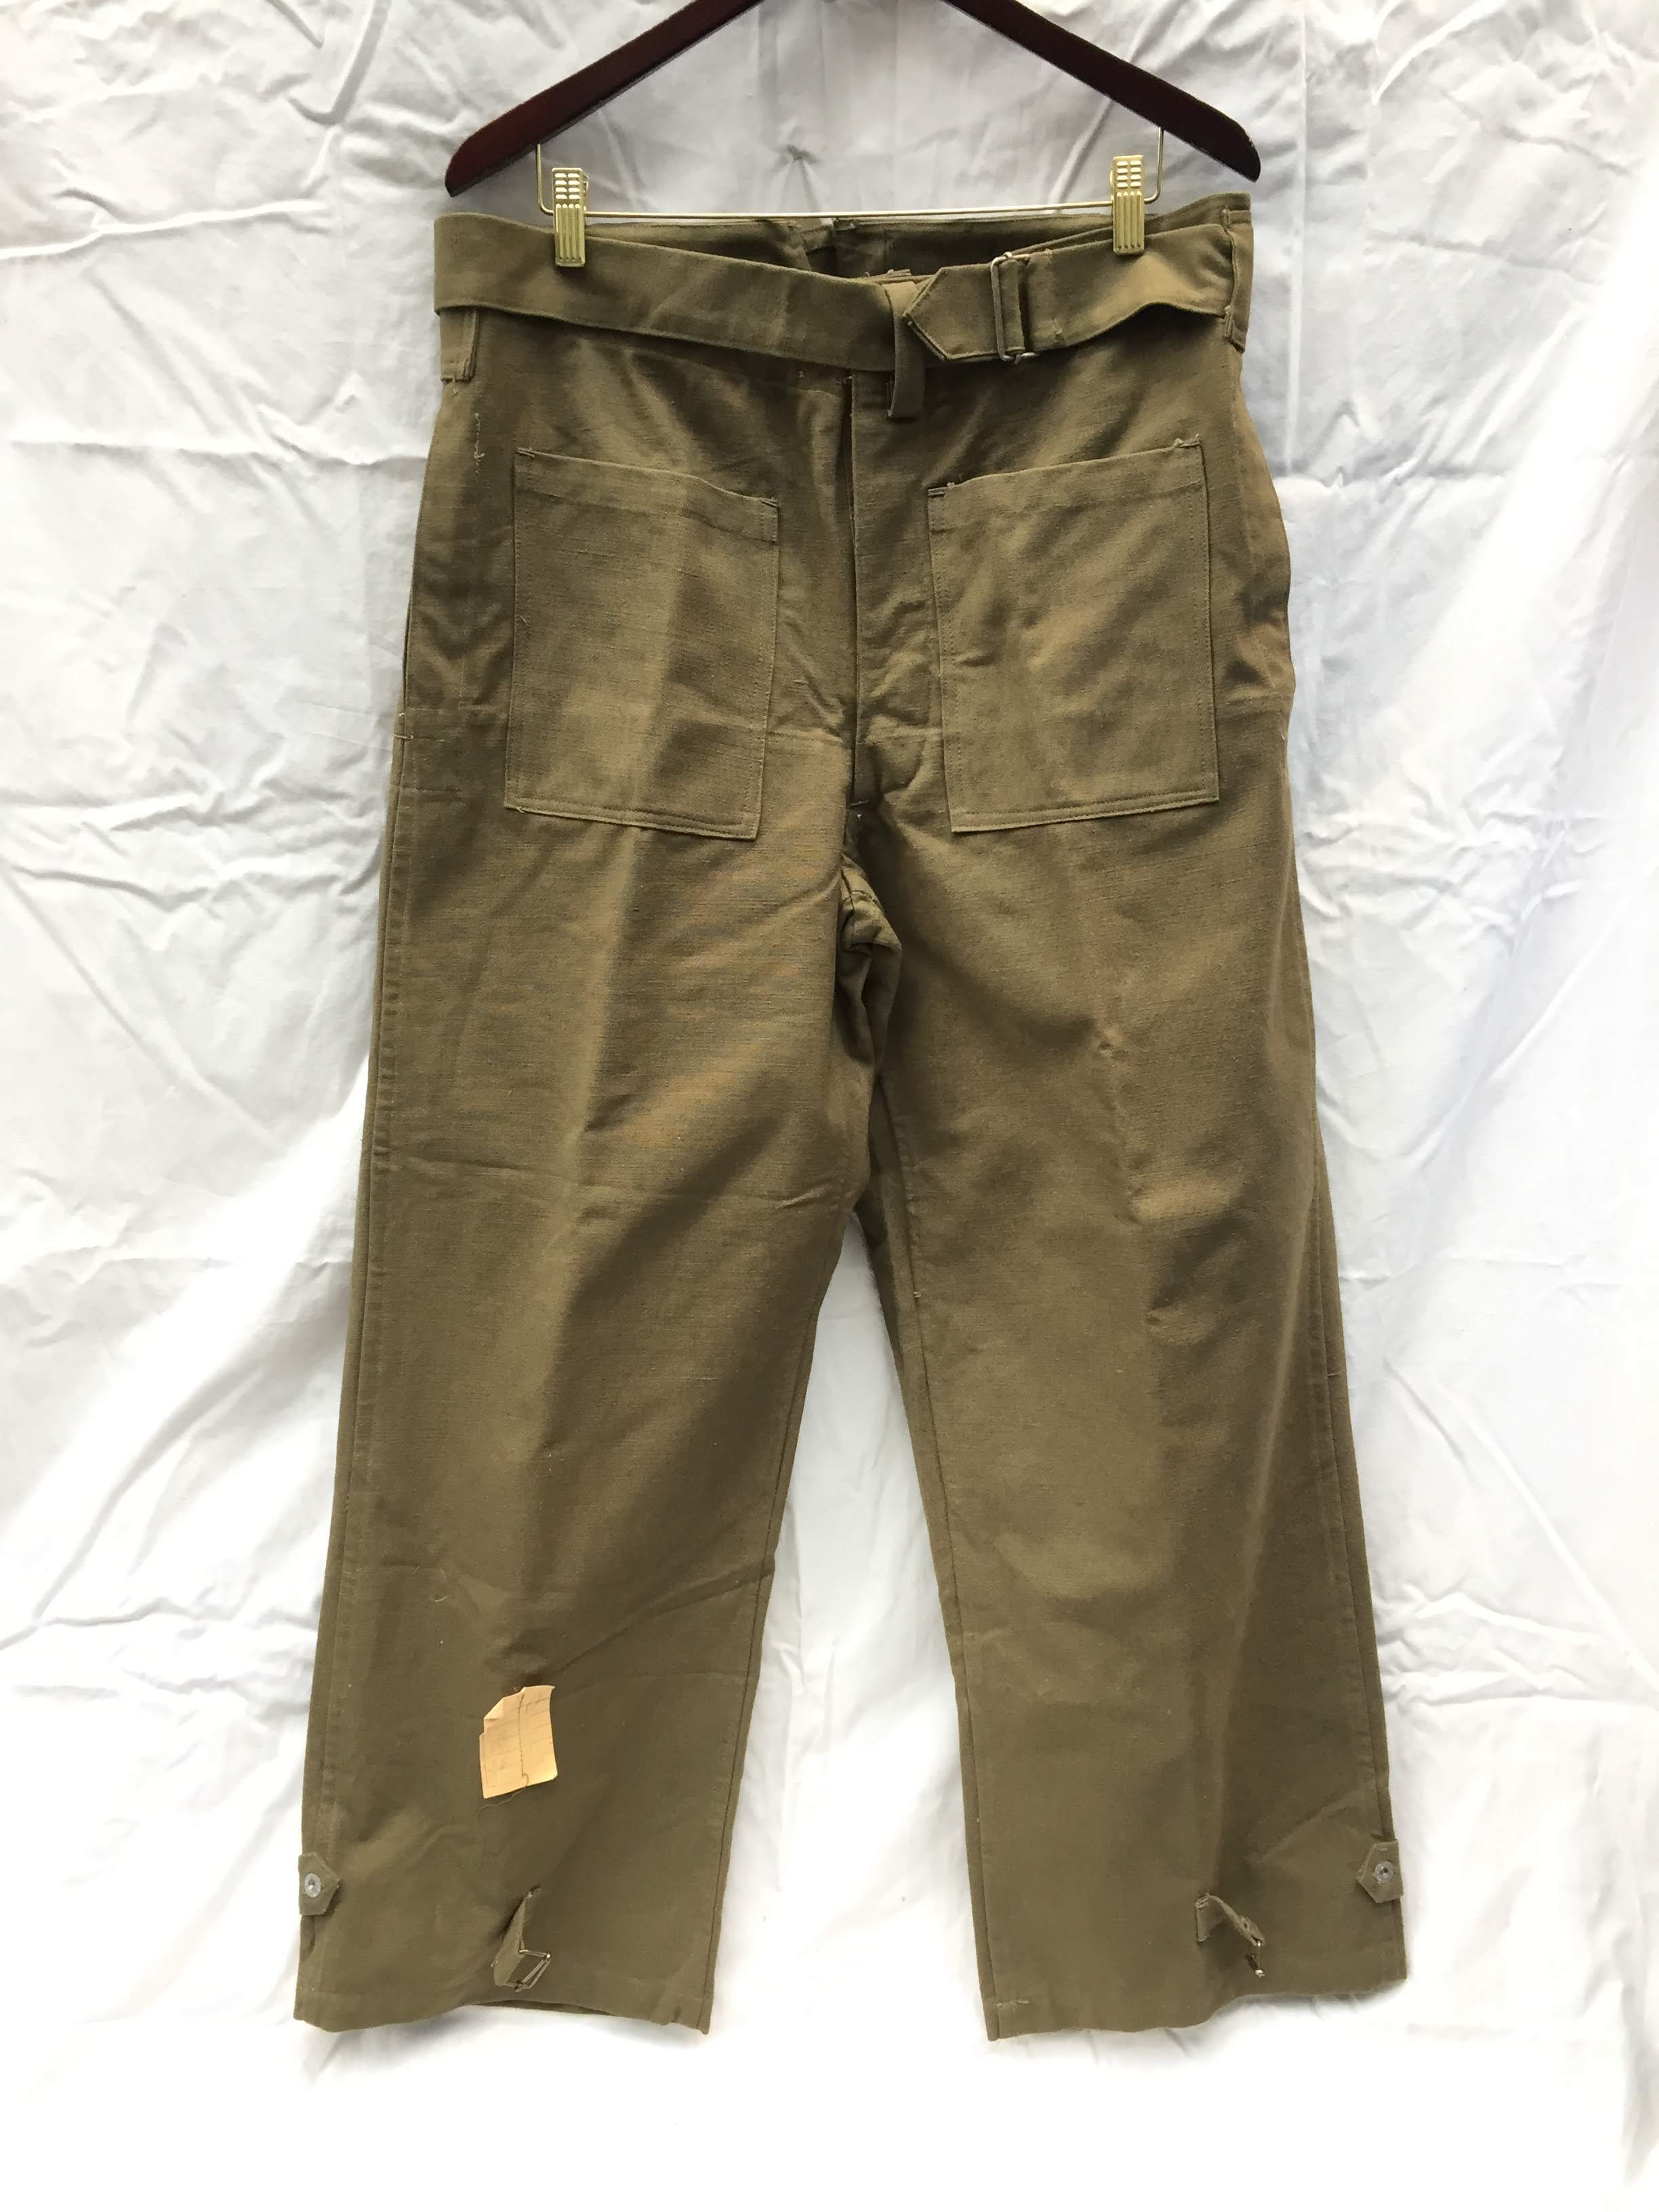 40-50's Vintage Dead Stock French Army Motorcycle Pants